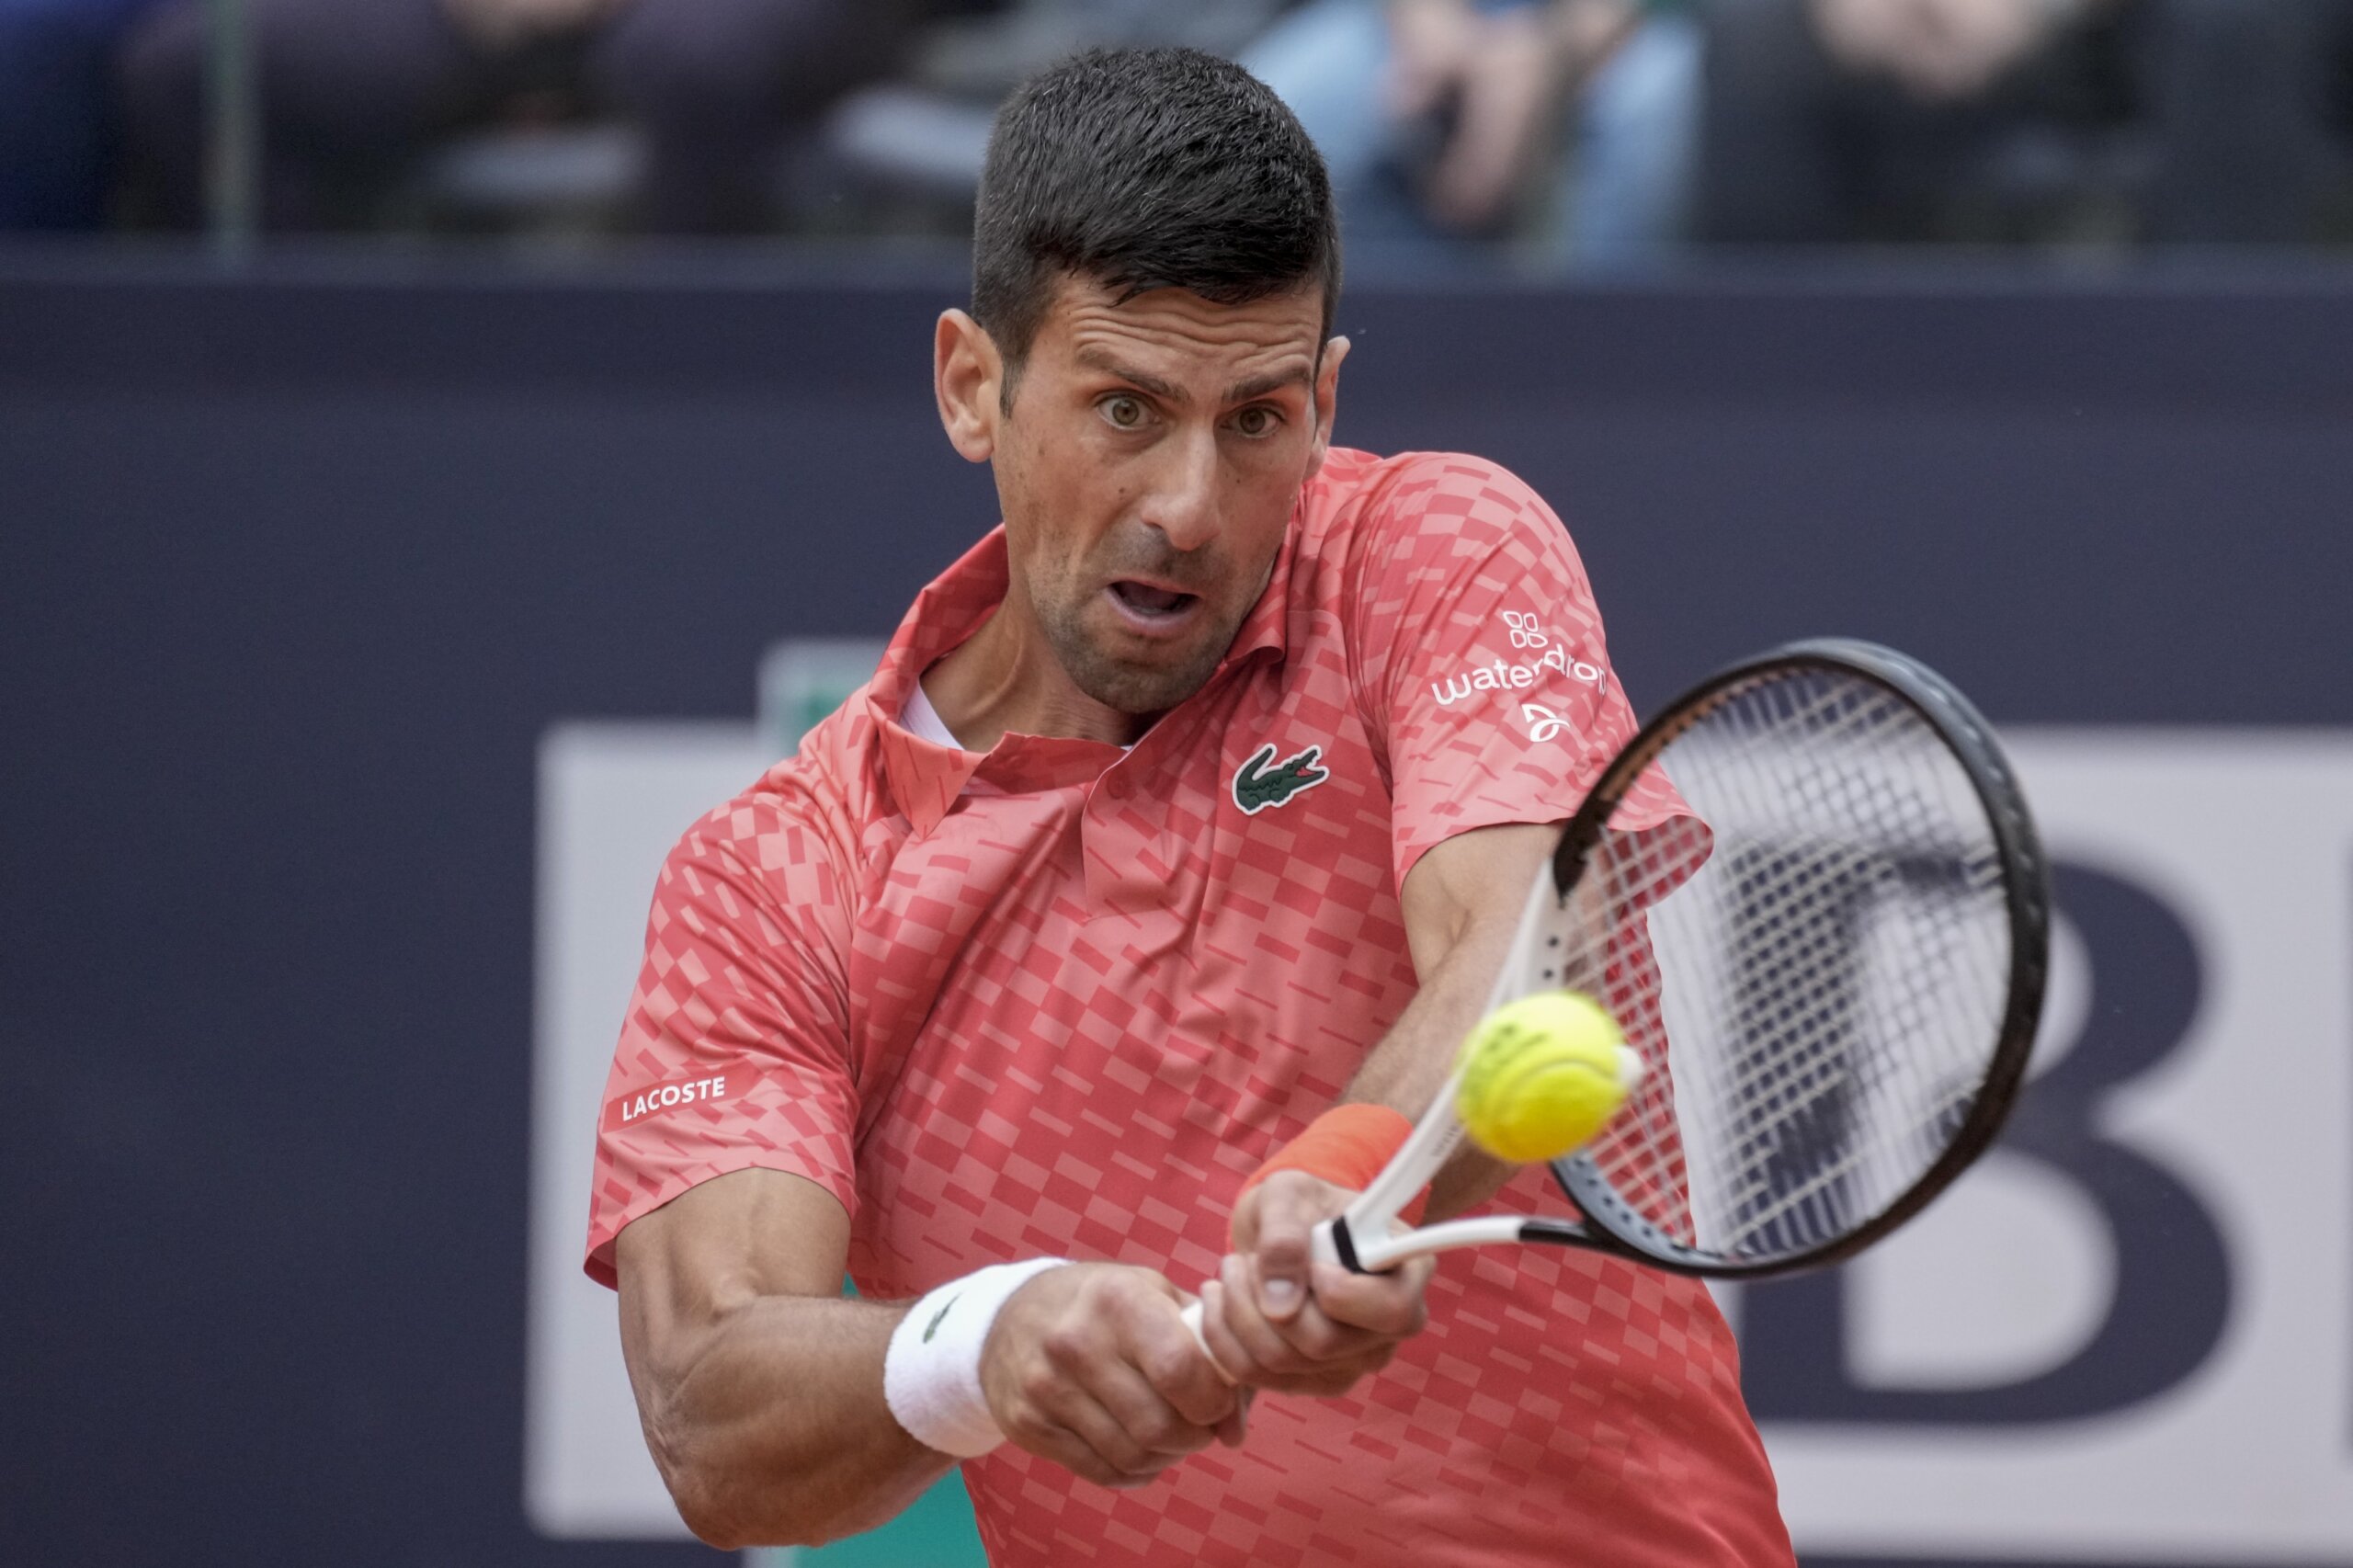 Djokovic takes issue with Norrie’s behavior at Italian Open ‘Not fair